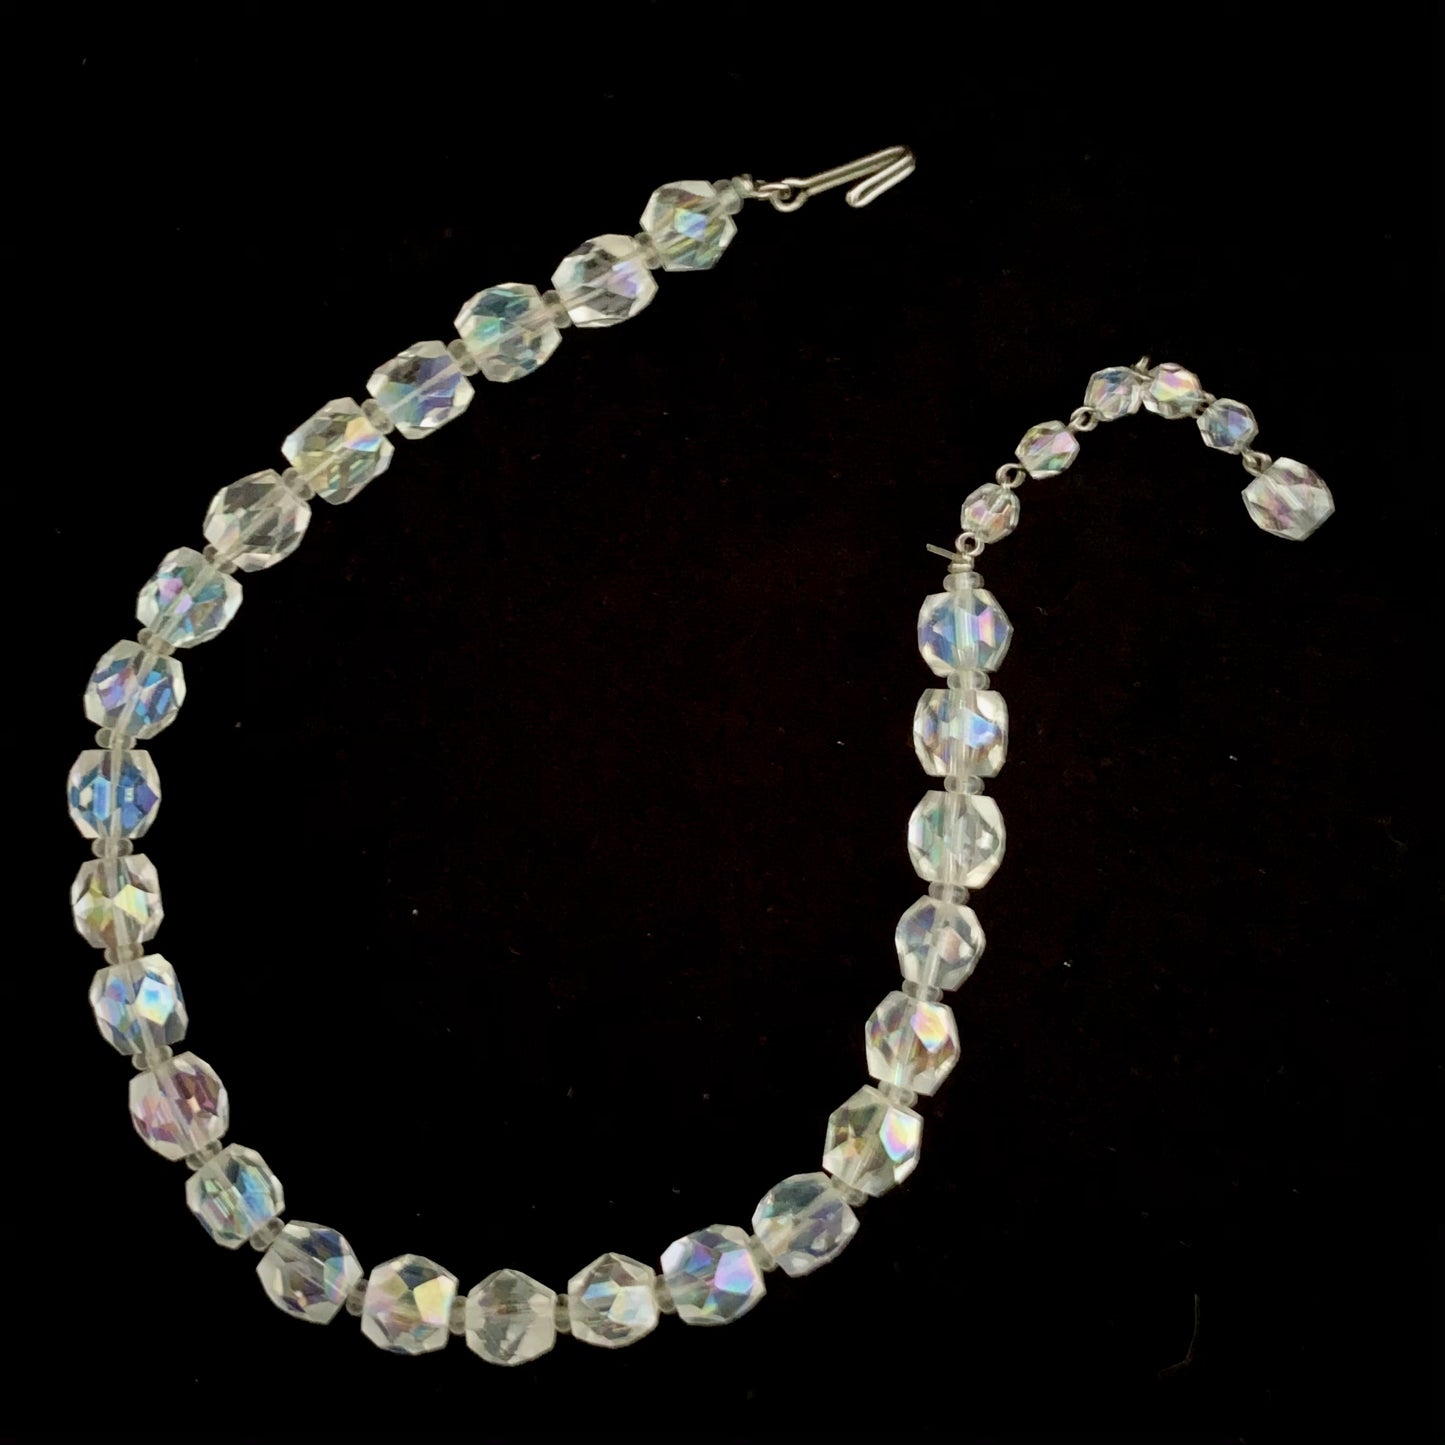 1950s Glass Crystal Necklace